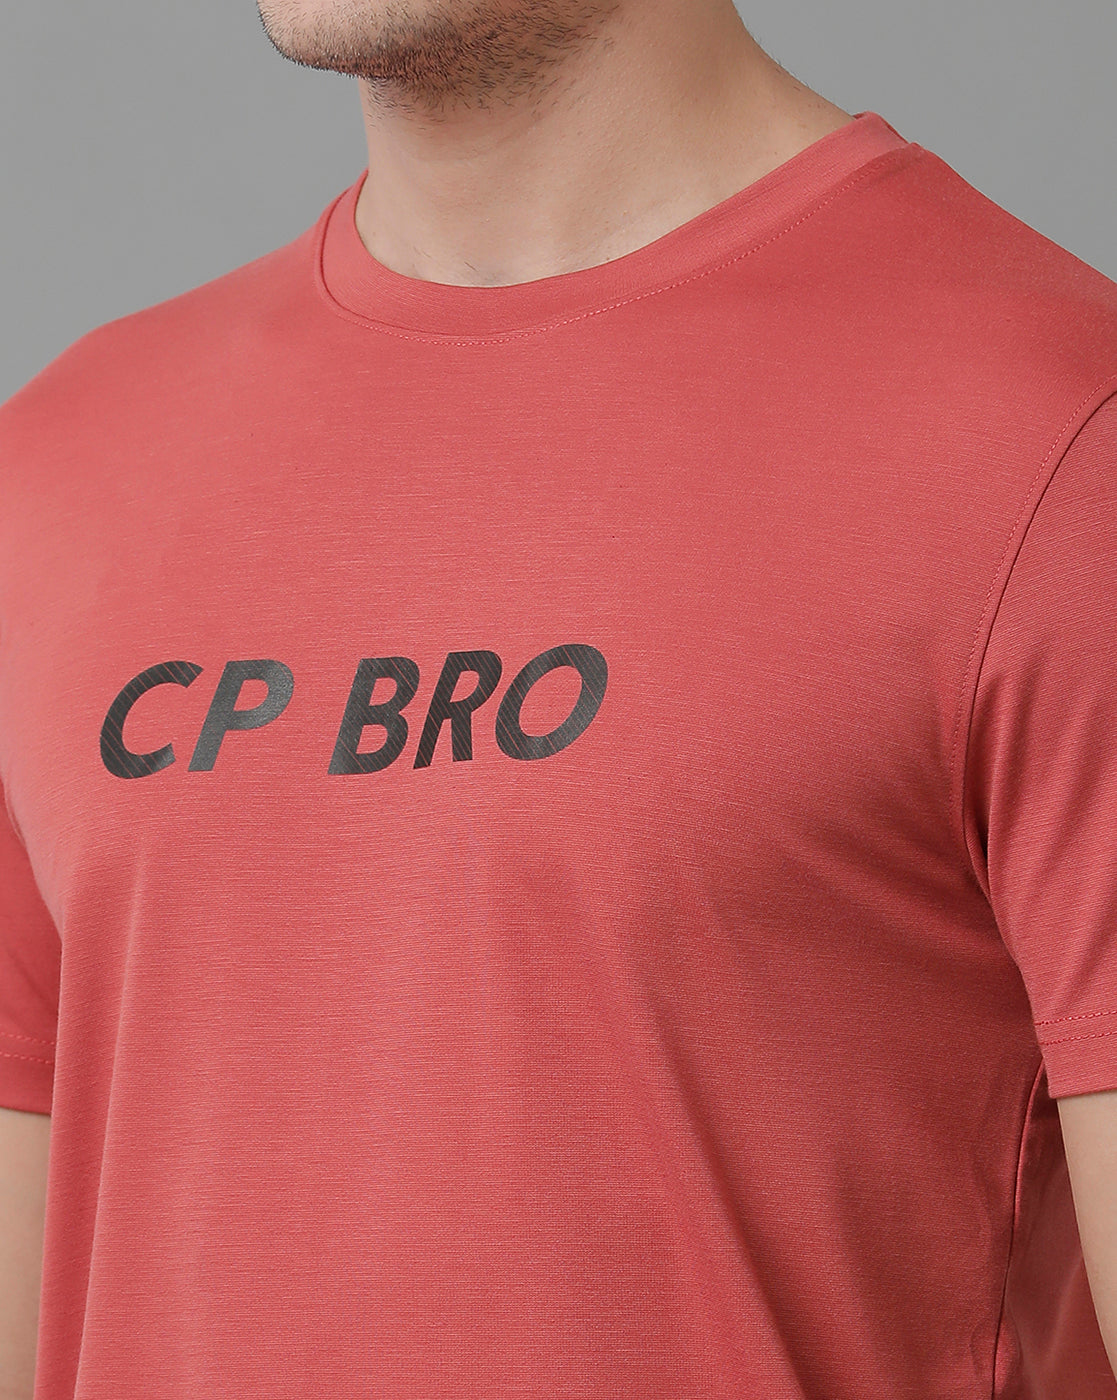 CP BRO Men's Cotton Half Sleeve Printed Slim Fit Round Neck Red Color T-Shirt | Brcn - 535 A